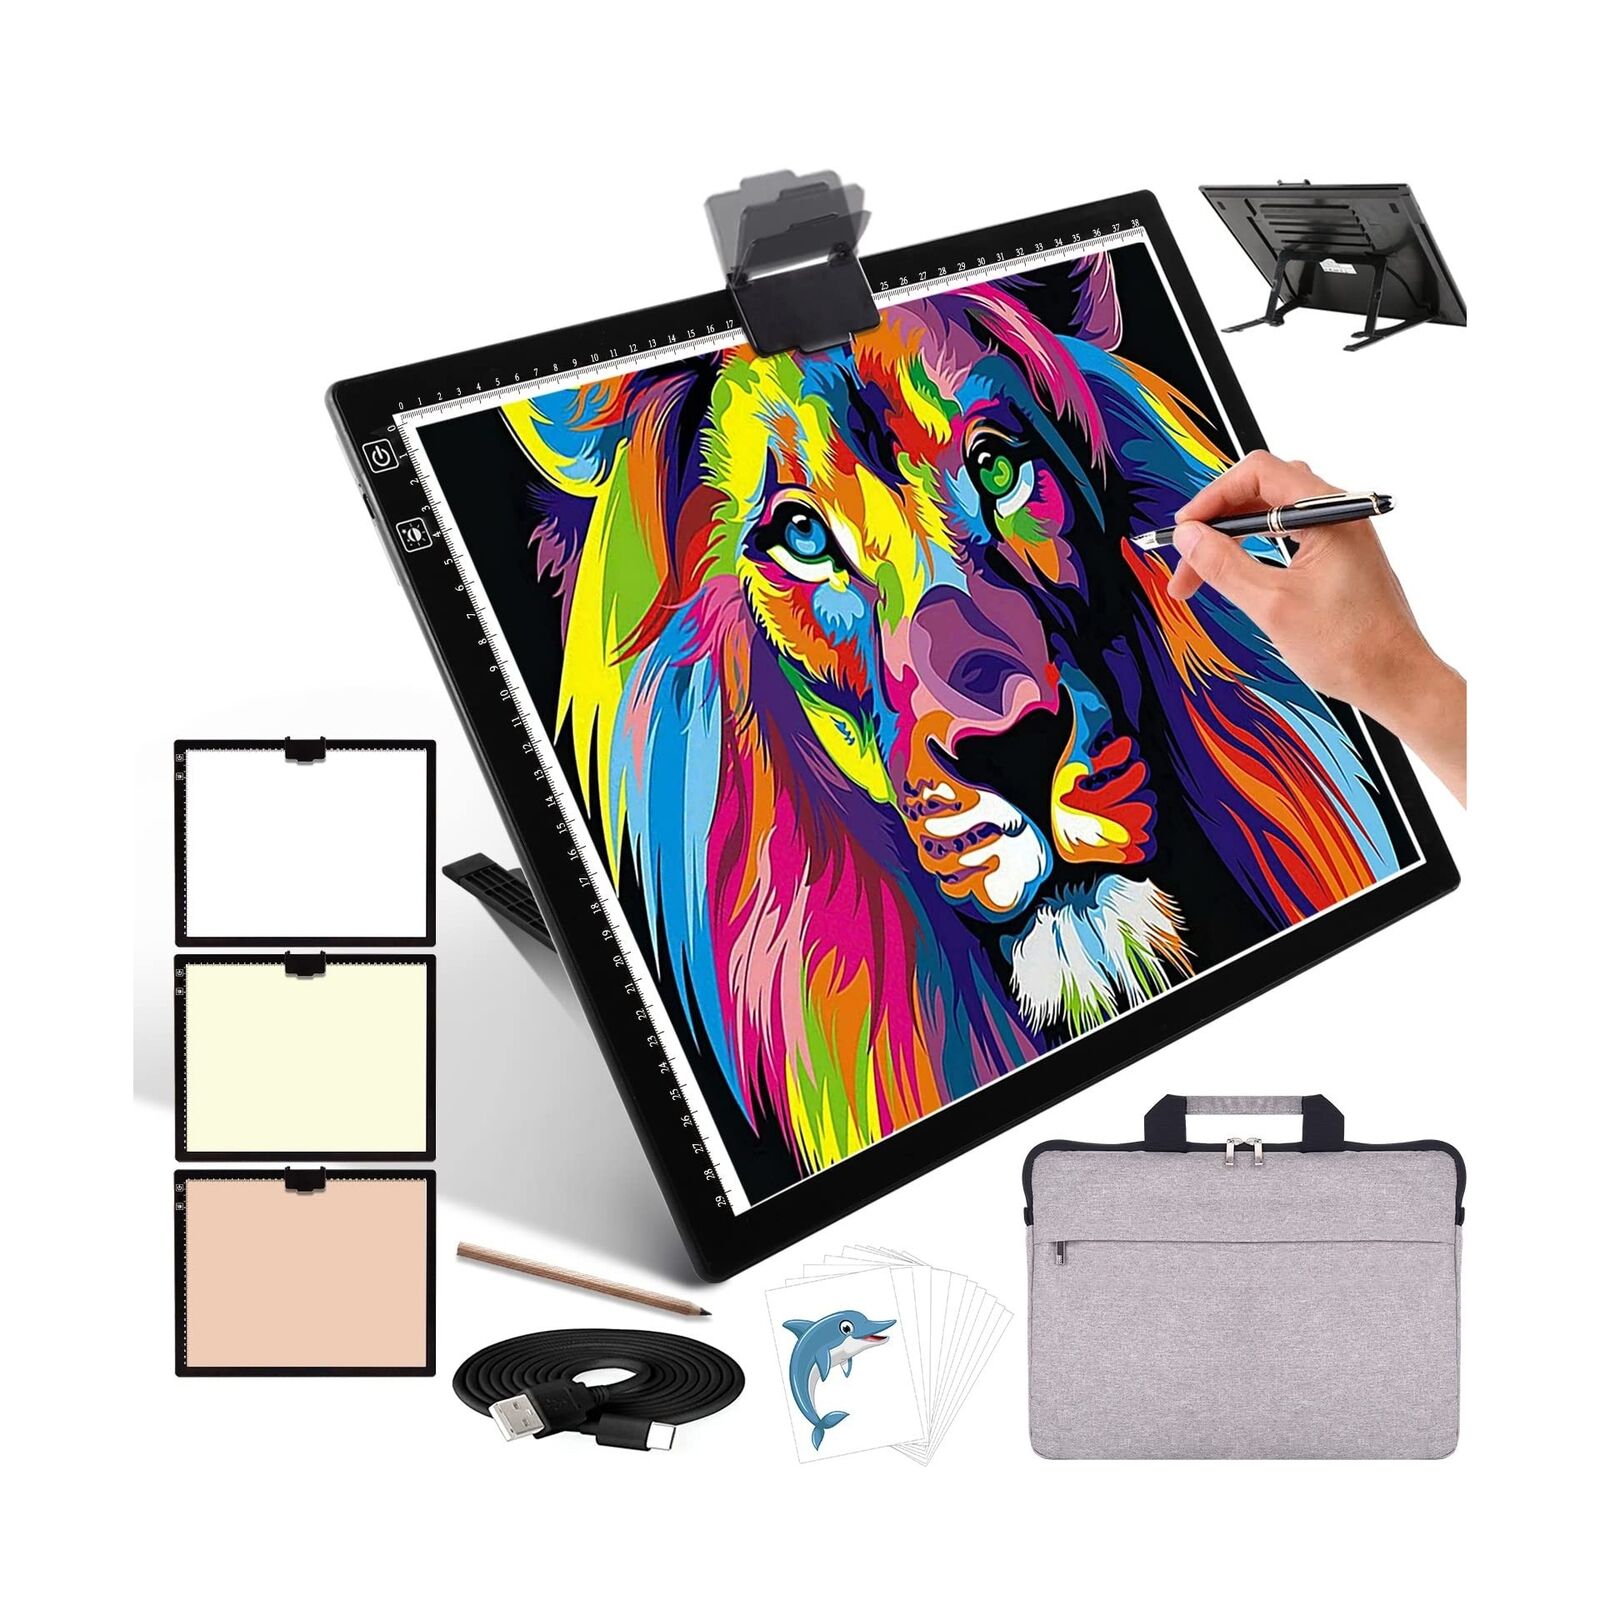 Rechargeable A3 Light Box with Built-in Foldable Stand and Carry Bag, iVAOOZE...